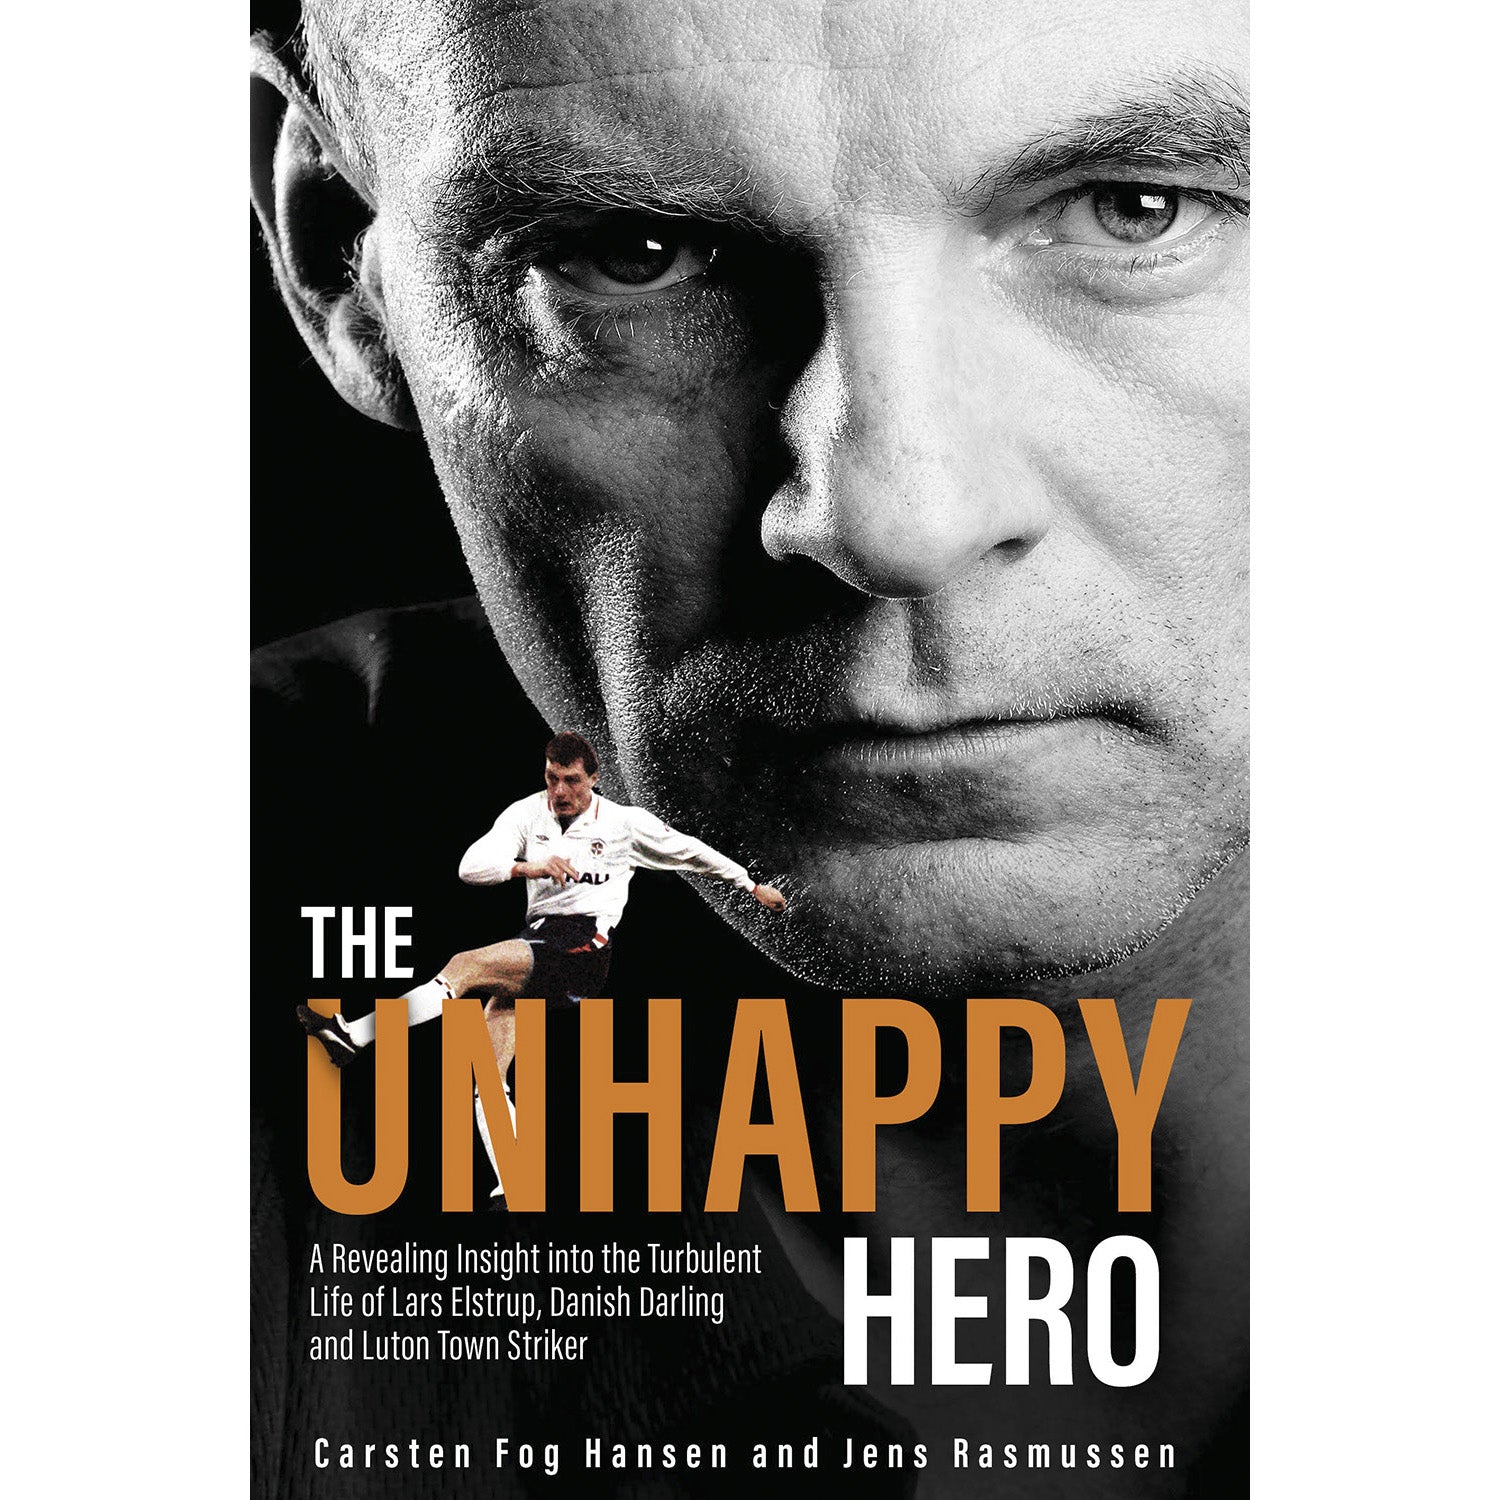 The Unhappy Hero – A Revealing Insight into the Turbulent Life of Lars Elstrup, Danish Darling and Luton Town Striker